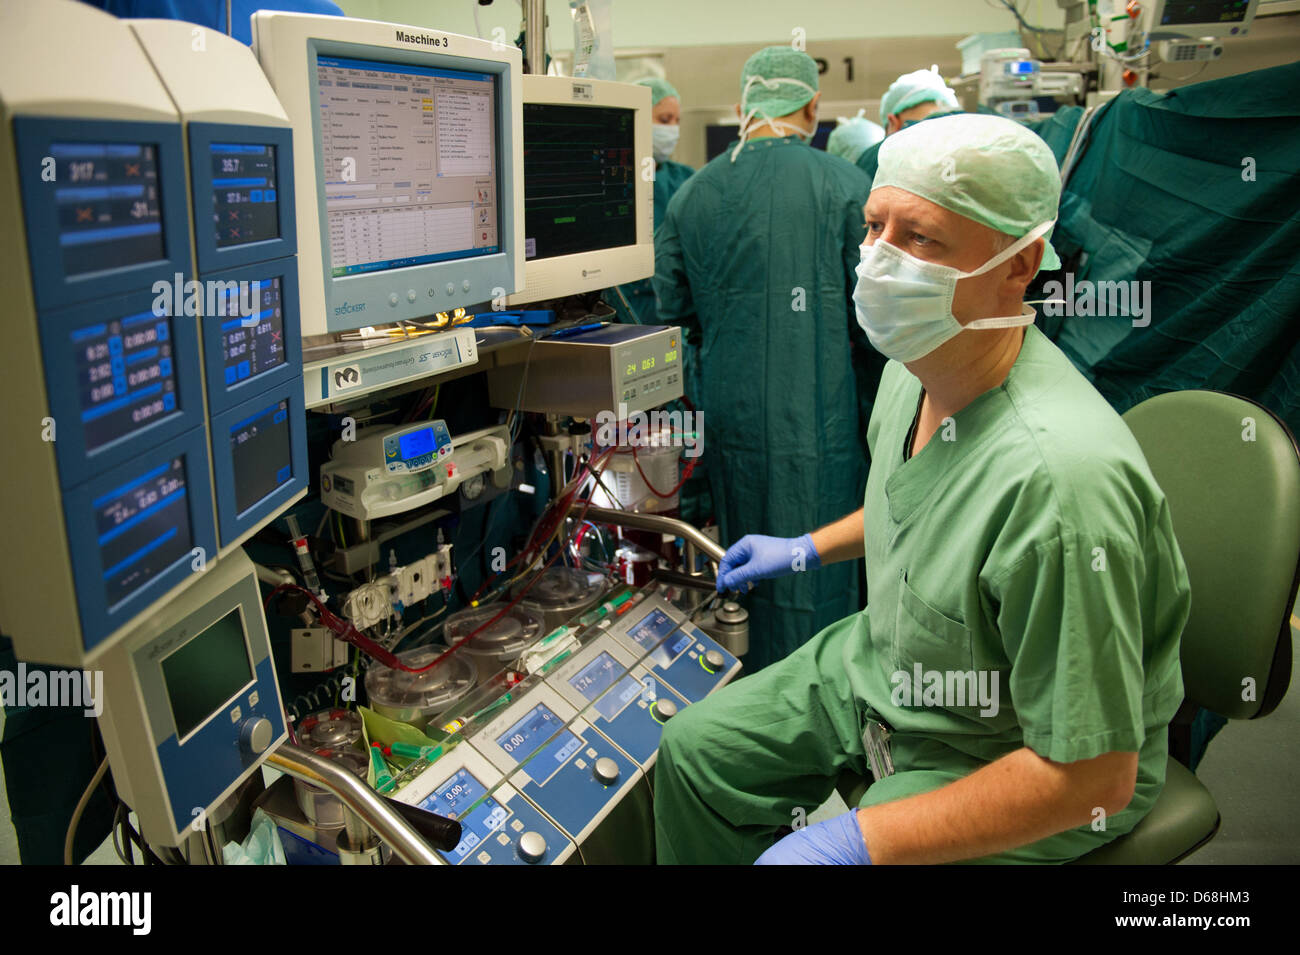 A doctor checks a breathing machine during an operation on a patient's heart at the German Heart Institute in Berlin, Gewrmany, 12 July 2012. Since 1987 more than 70,000 open-heart surgeries have been performed here. Photo: Maurizio Gambarini Stock Photo